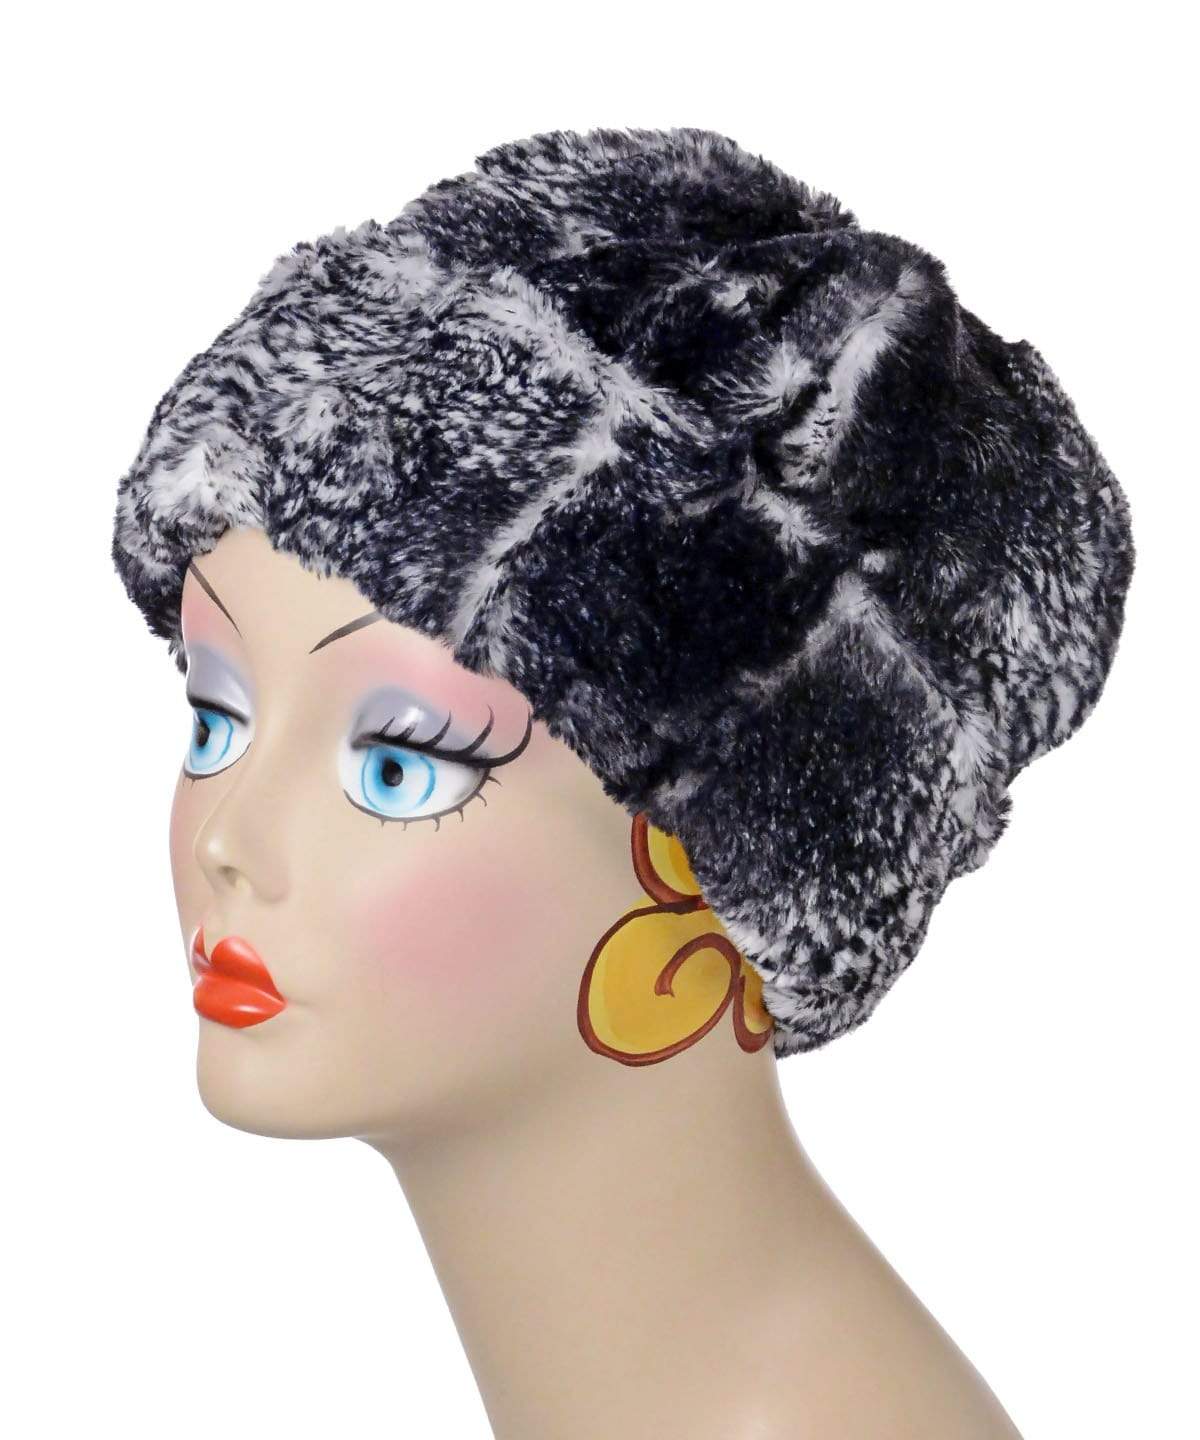 Beanie Hat reversible in Black Mamba and Cuddly Black Faux Fur. Handmade by Pandemonium Millinery in Seattle, WA.